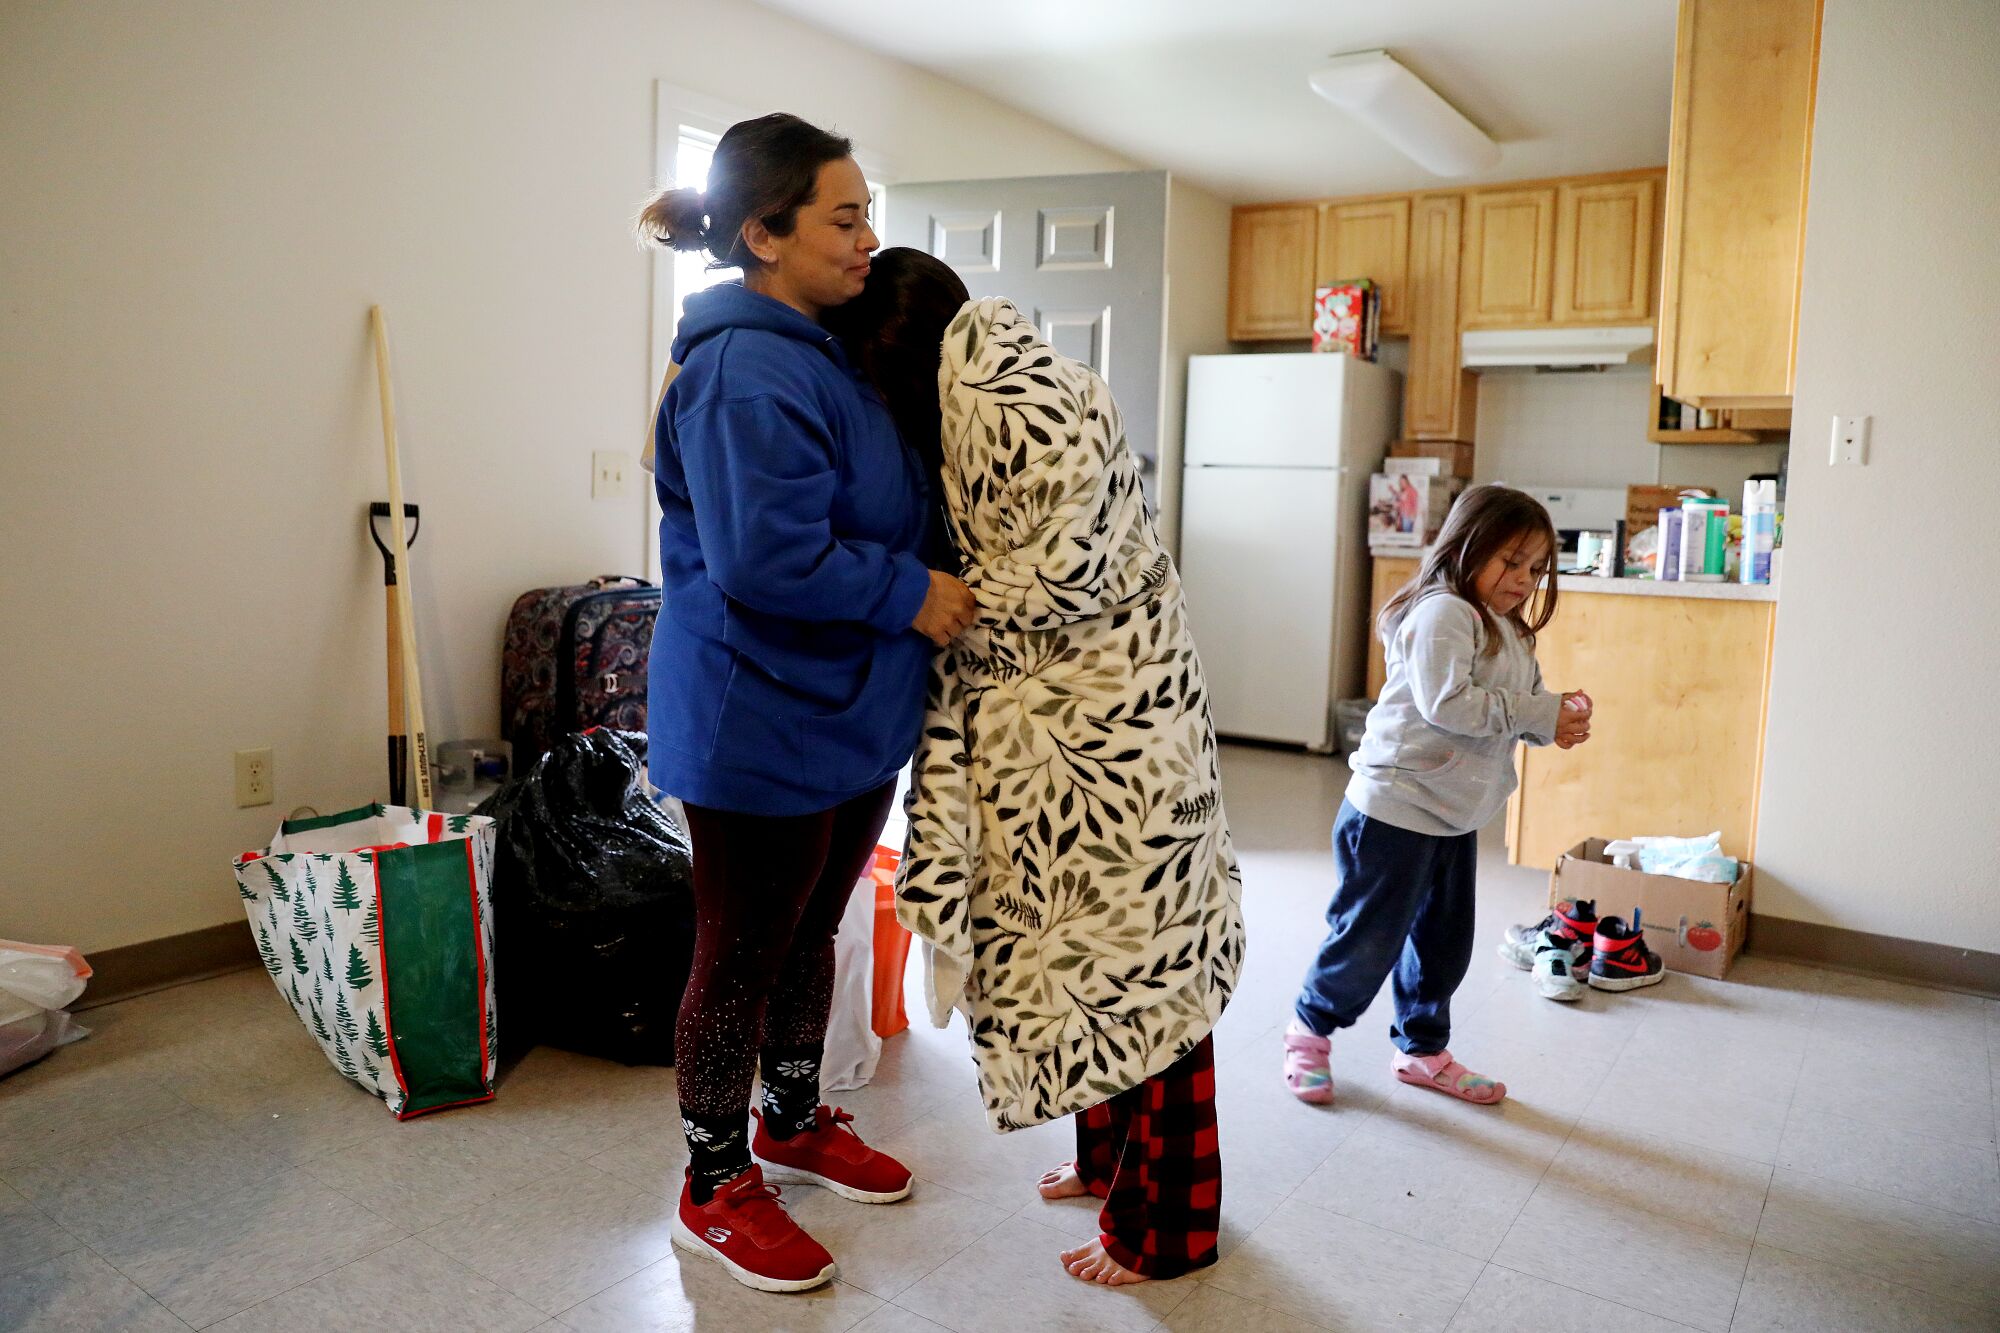 The Lopez family evacuated to temporary housing after their home was flooded in Planada.